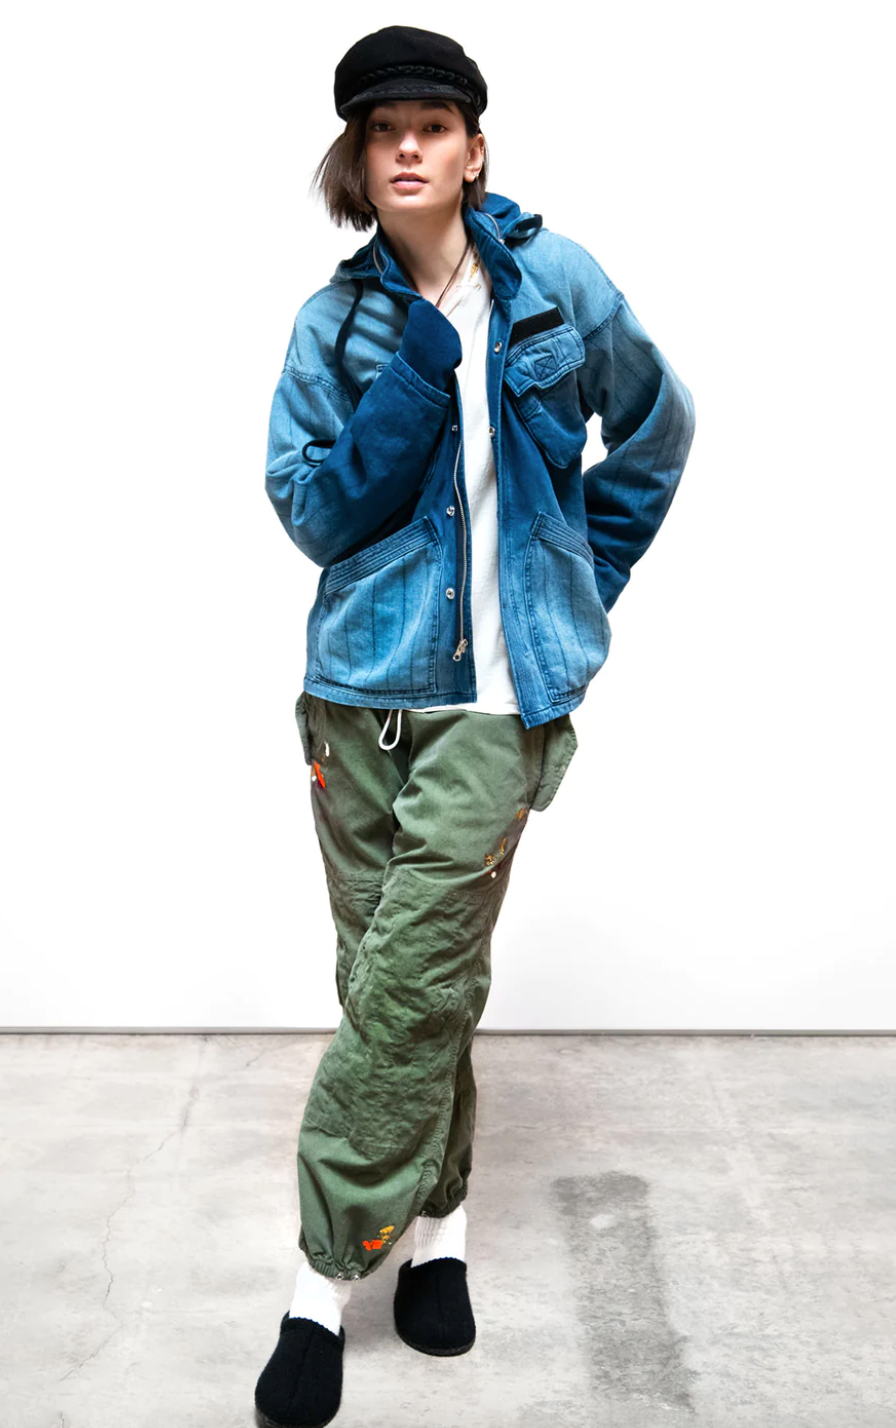 A young person sporting a stylish Free City (sparrow, LLC) ARTISTSWANTED INDIGO ZIP HOOD jacket - INDIGO2 over a white shirt and green embroidered pants stands confidently against a plain background, wearing a black cap and black socks.